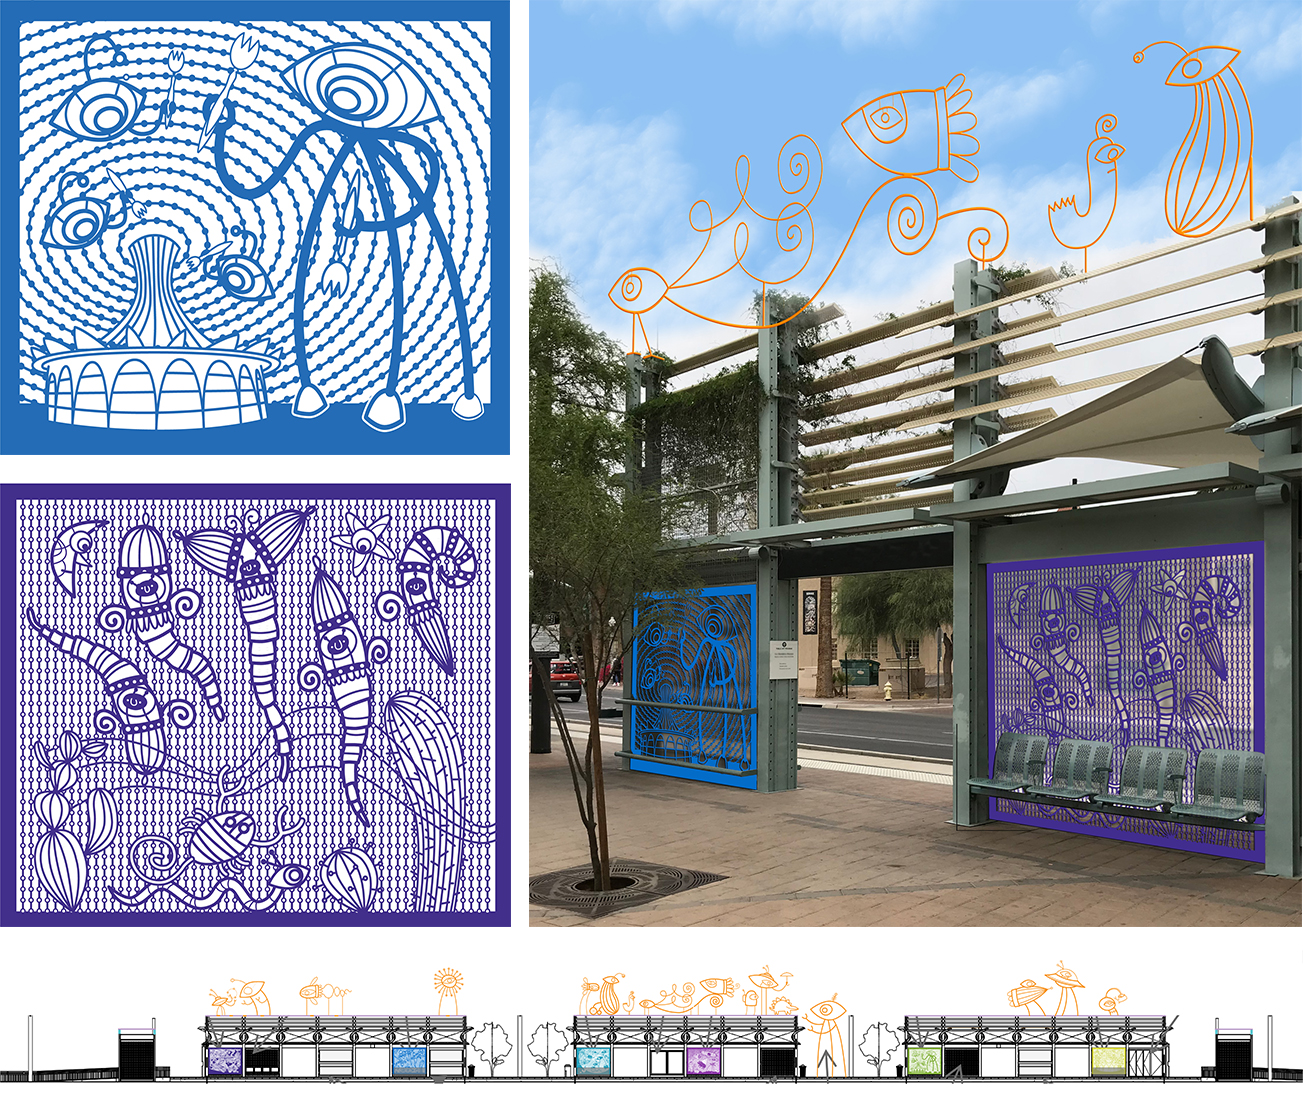 Art concepts by Pete Goldlust for 25th Ave and Dunlap Station